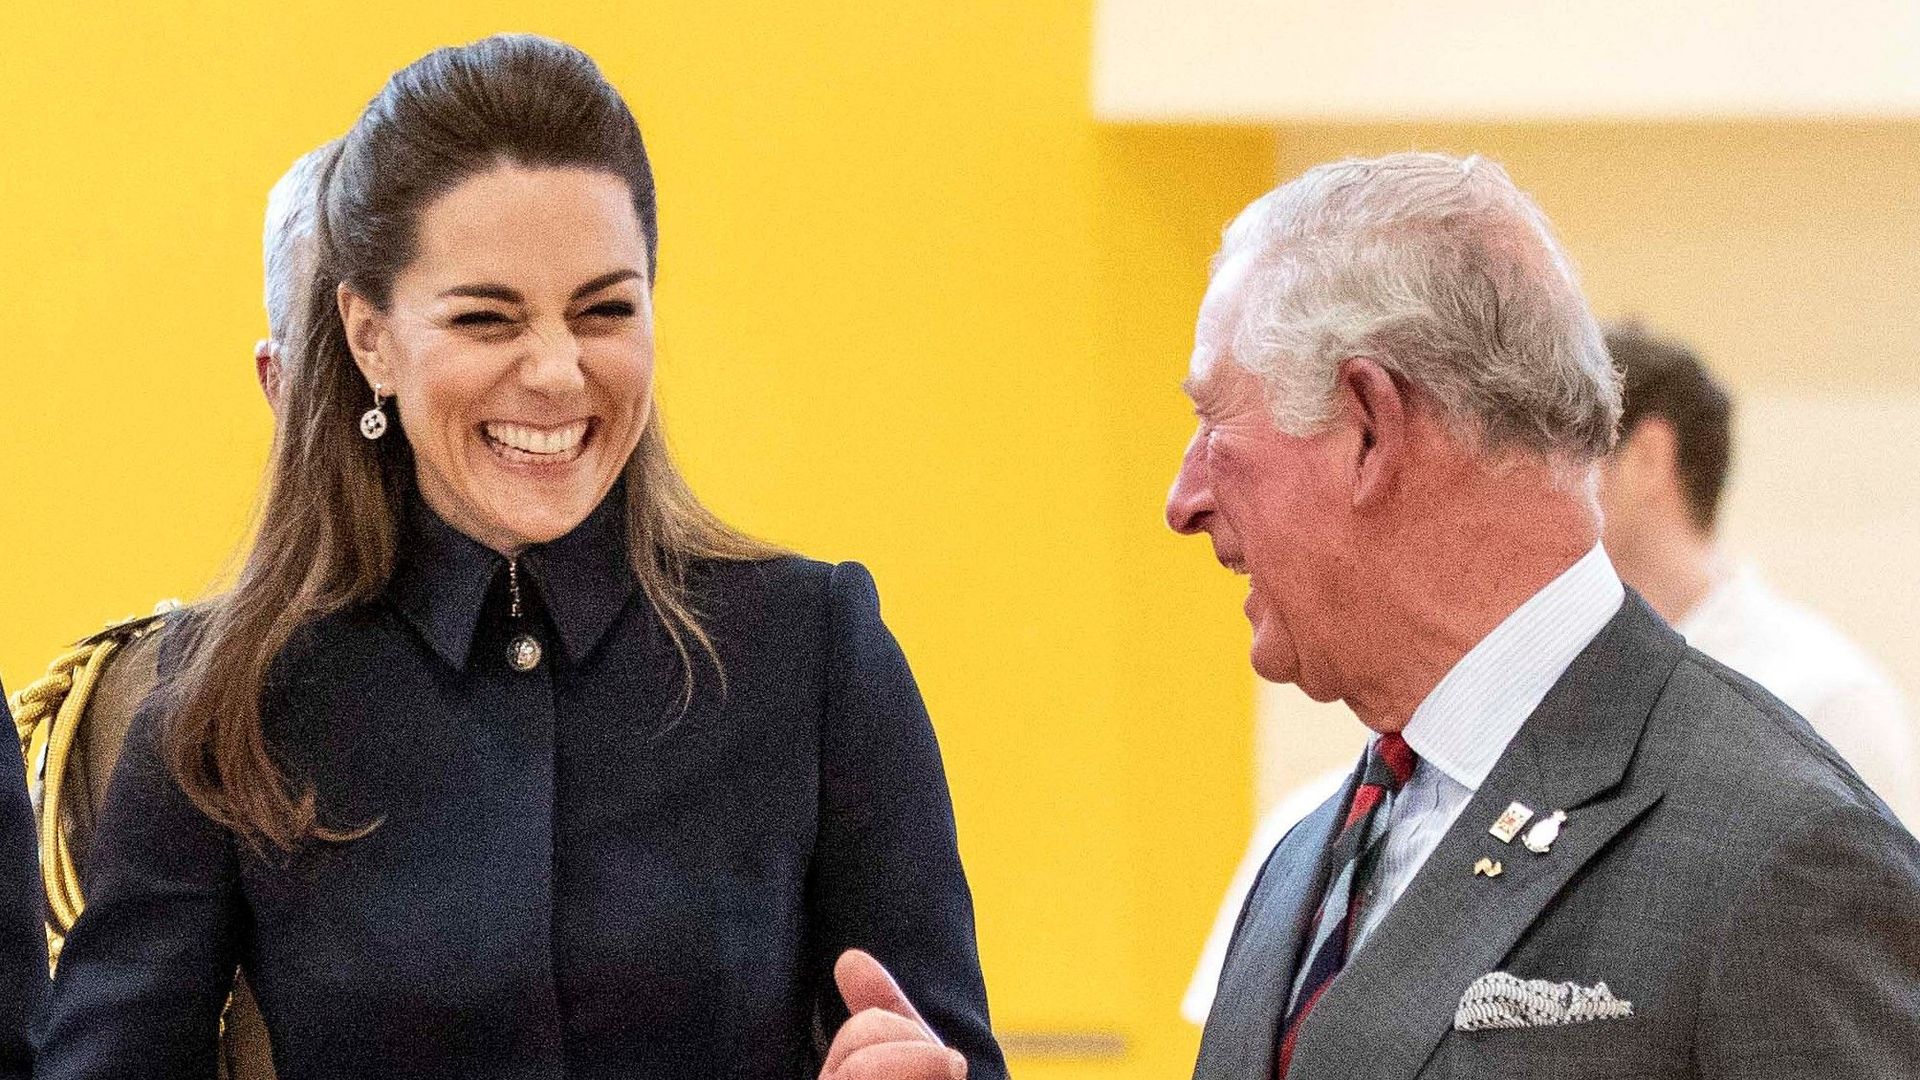 The then Prince Charles and Kate laughing during an event in 2020